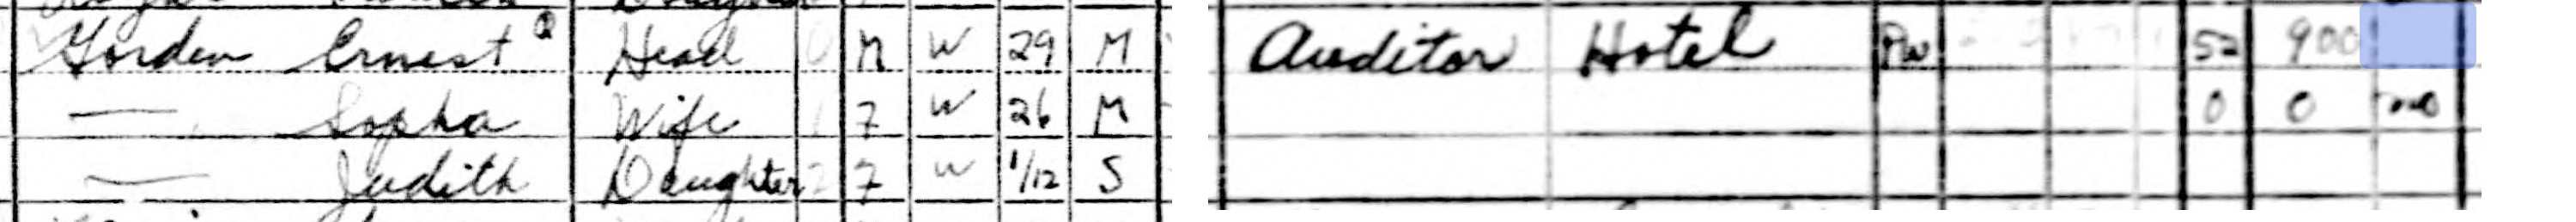 census entry showing income information for Ernest, Sophia, and Judith